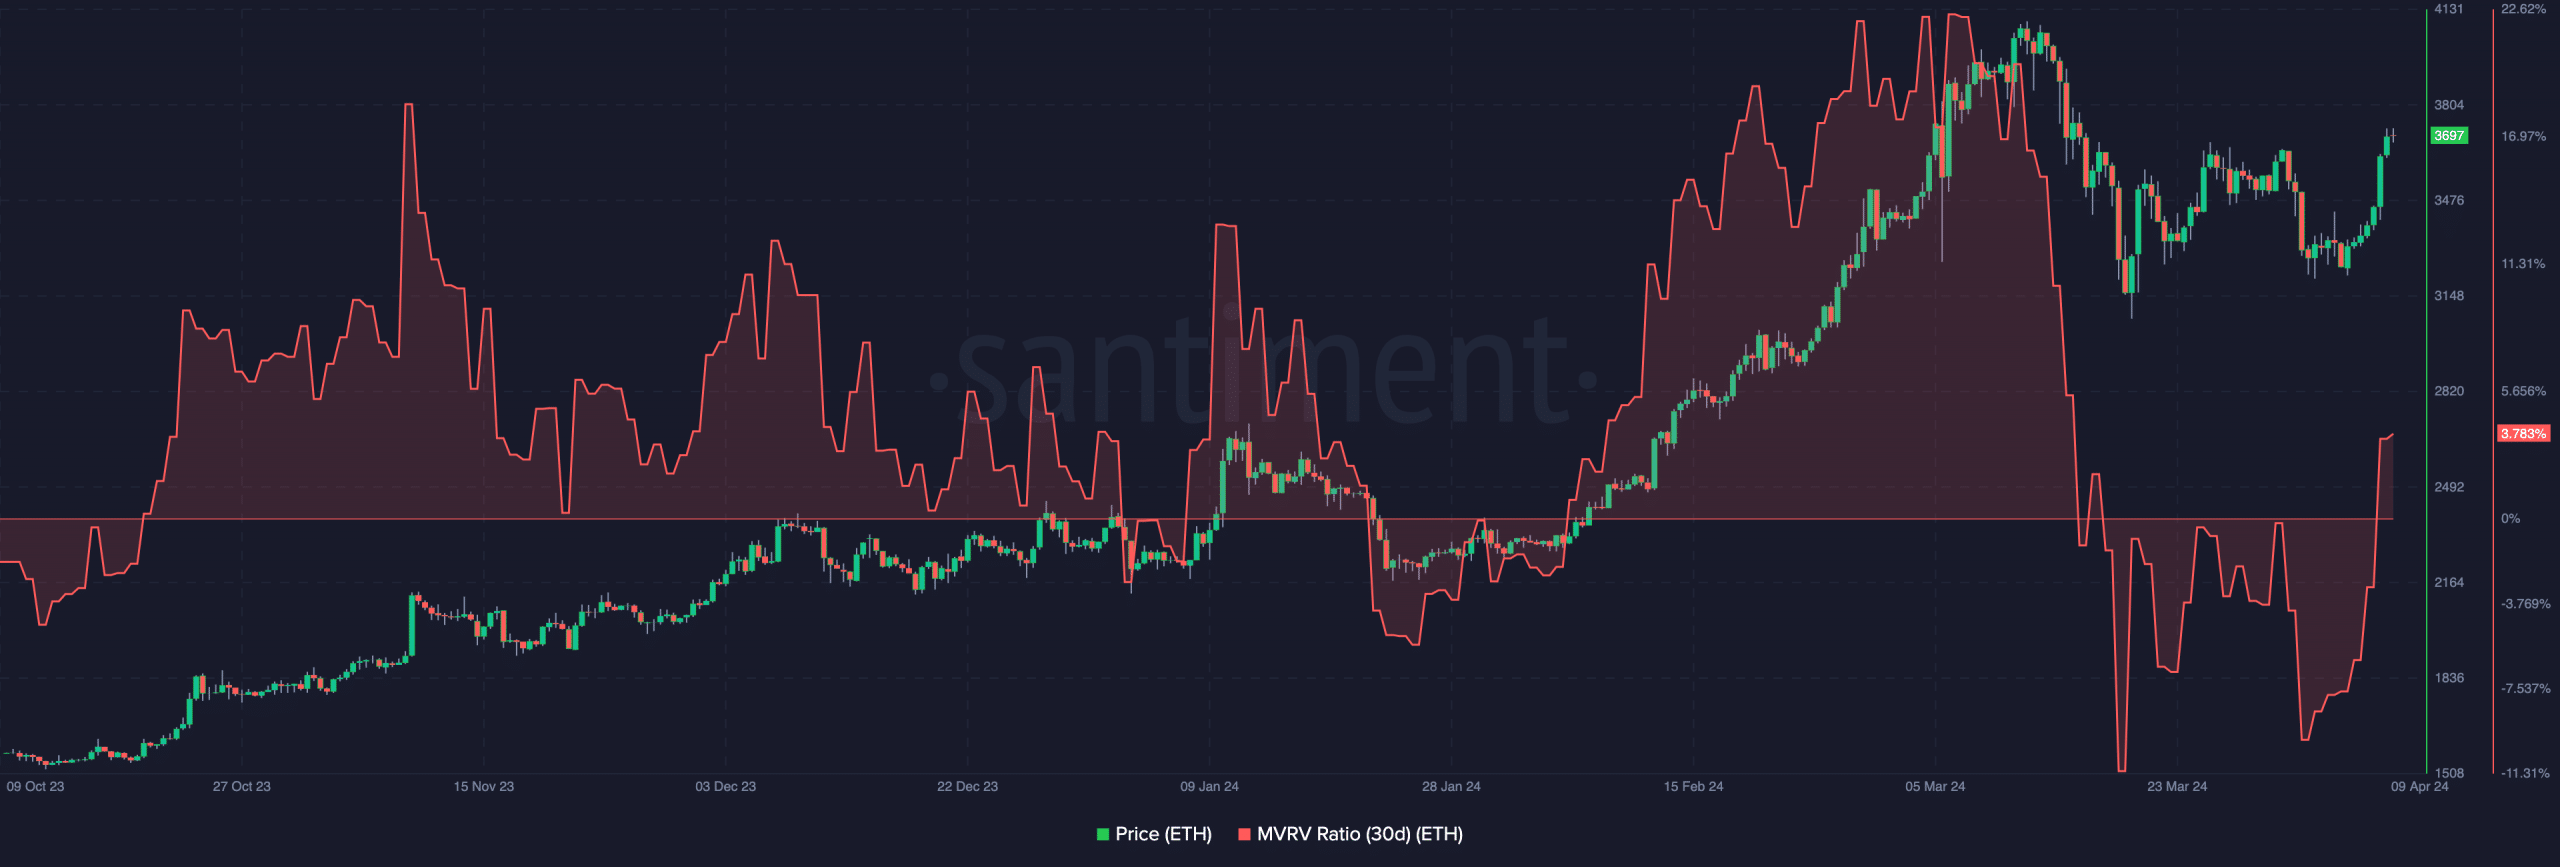 ETH's historical data showing how the price may continue to increase